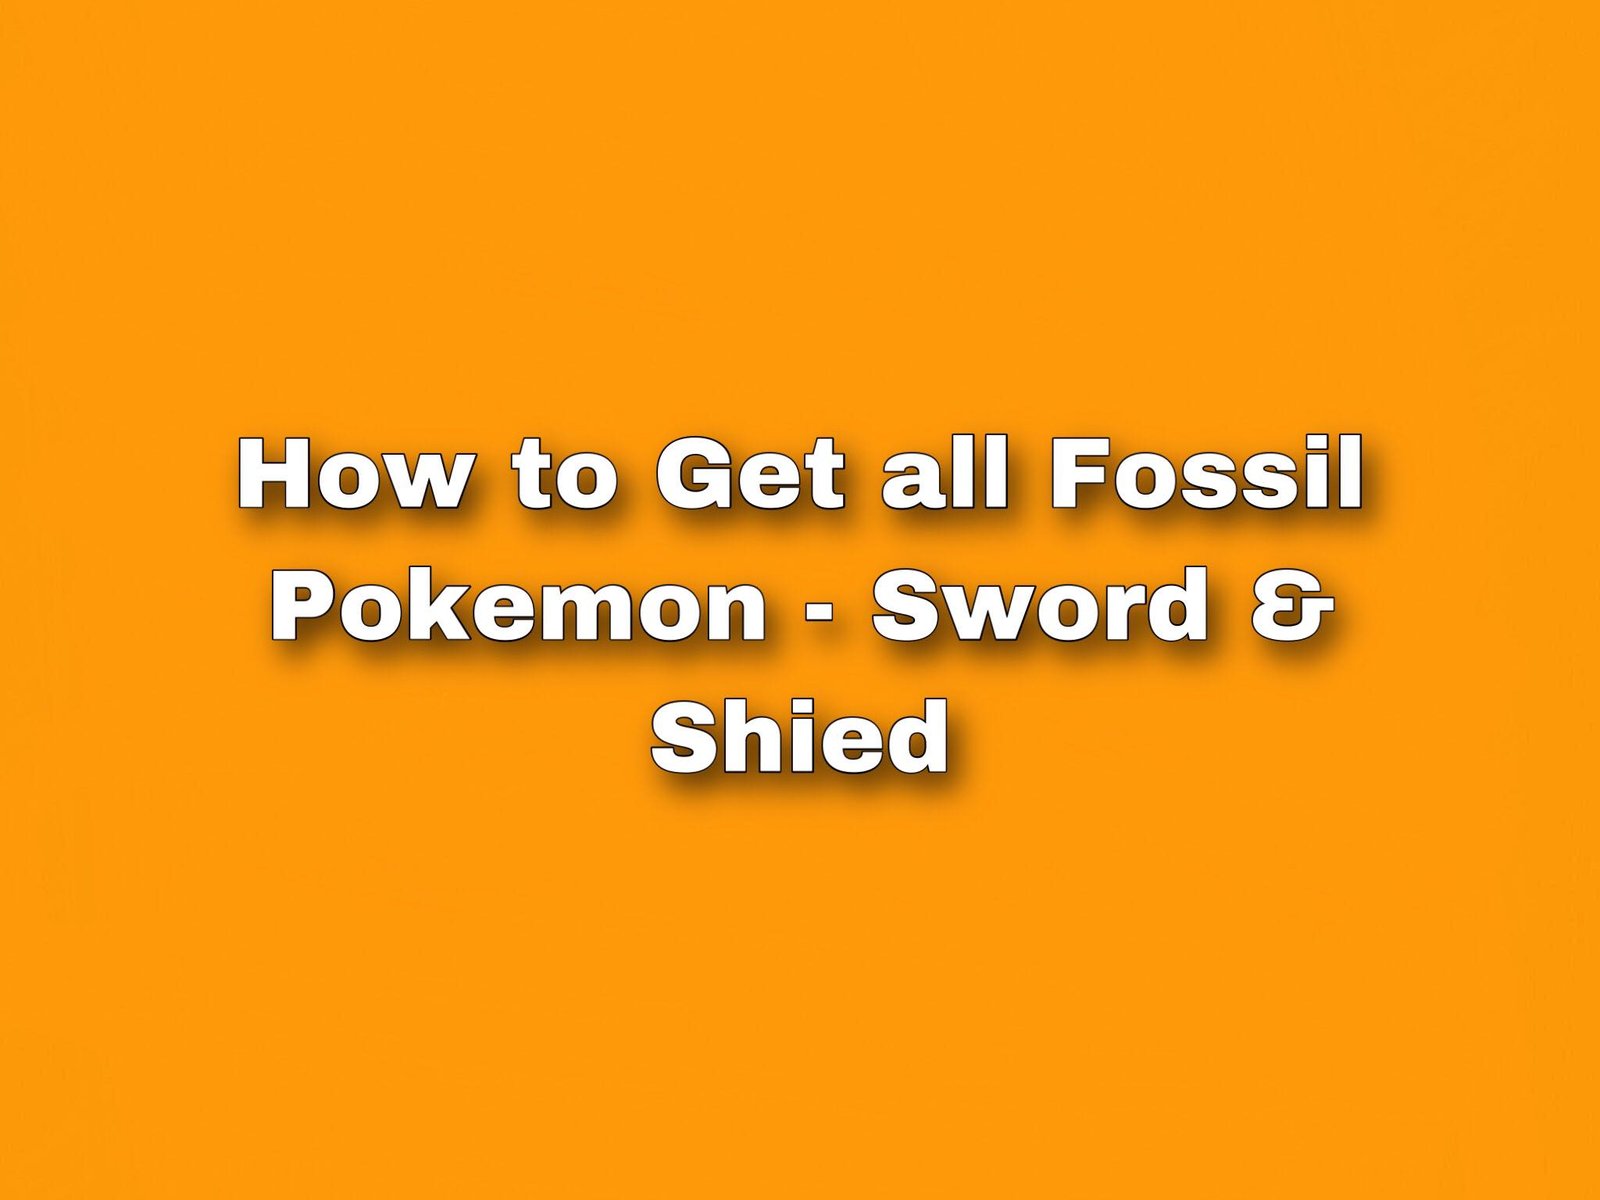 How to get all four Fossil Pokemon Sword and Shield